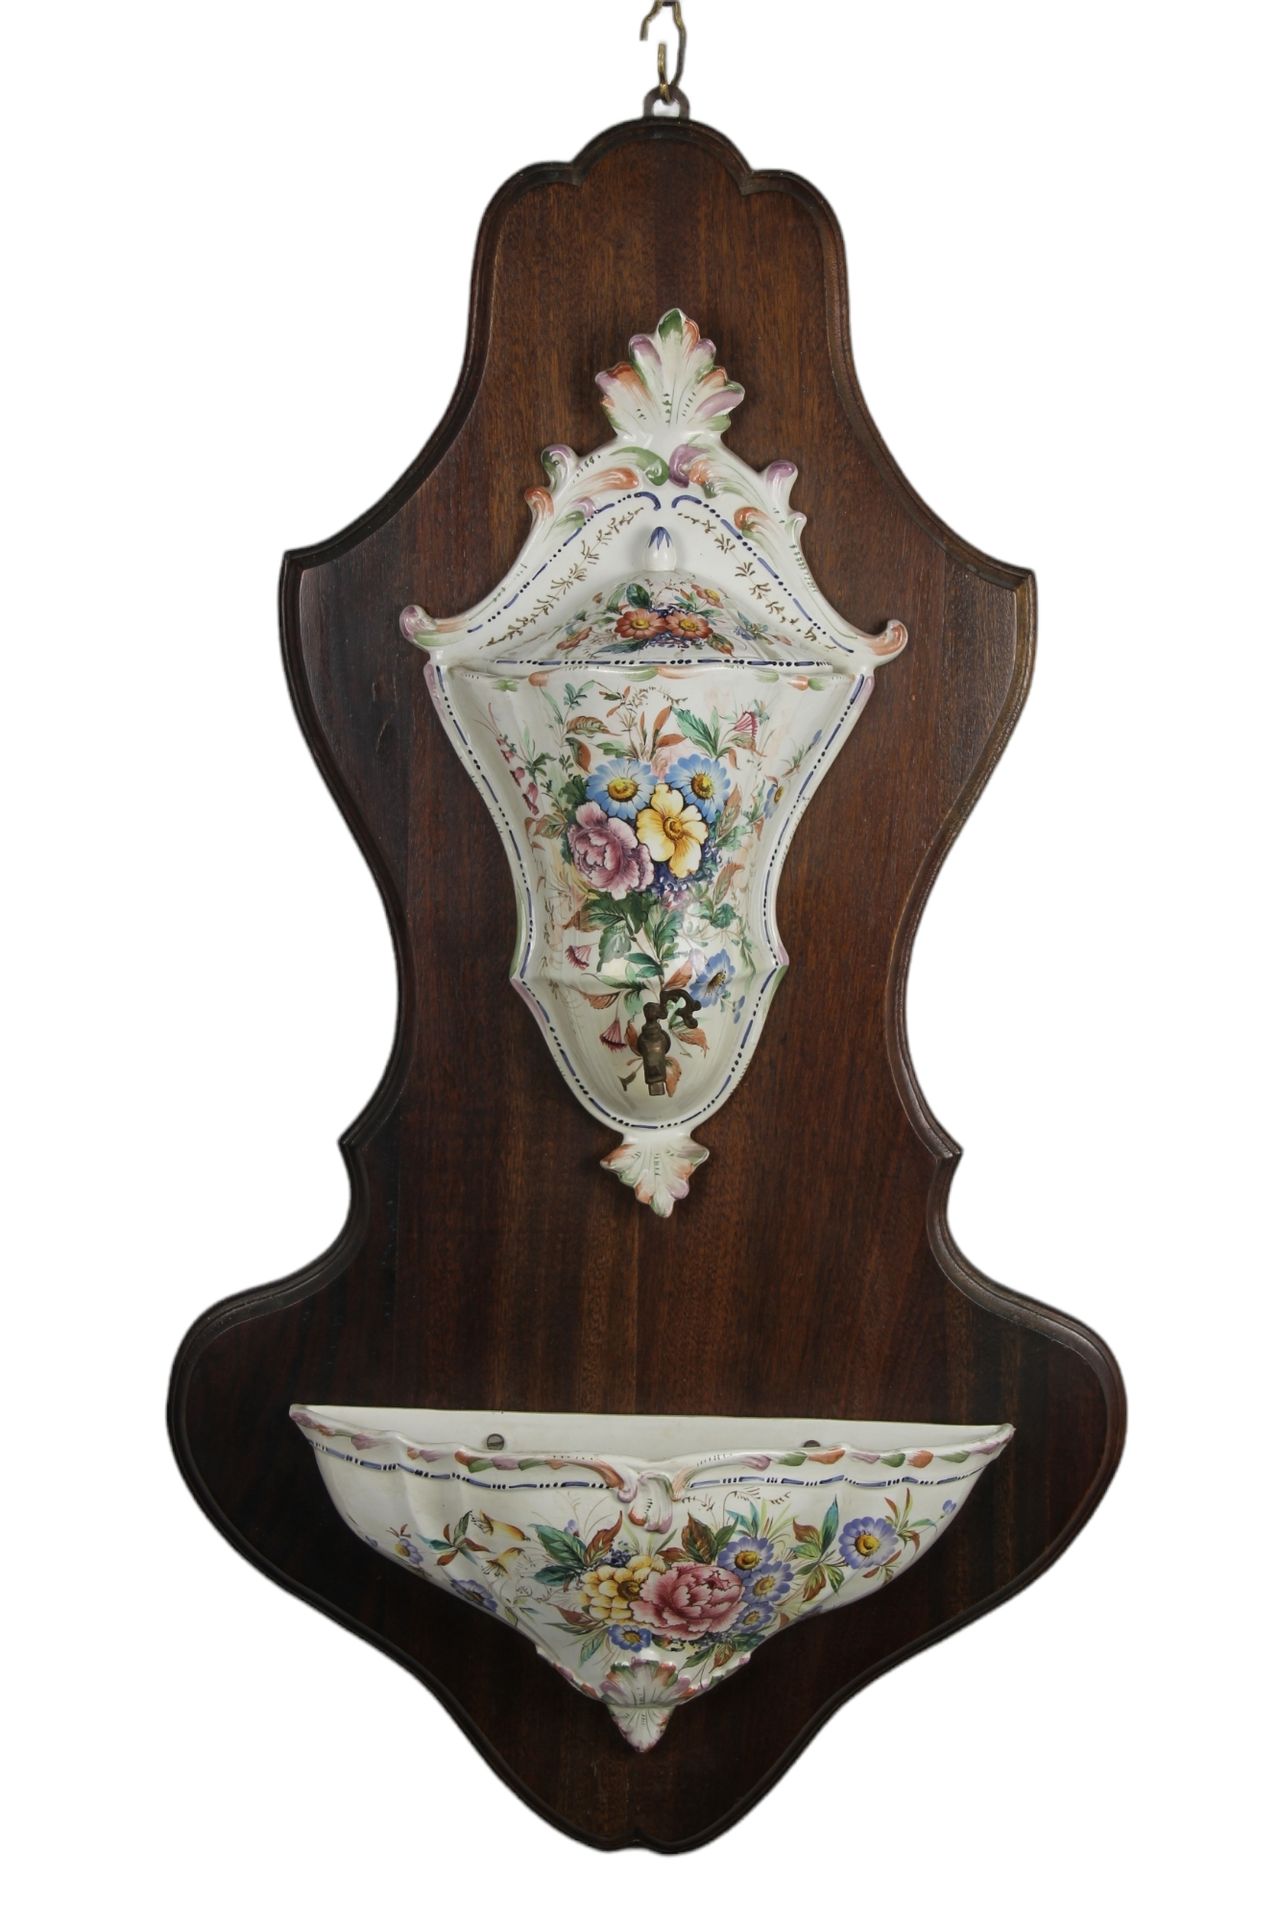 Fontanella floral painted ceramic with pourer . Veneto early 1900s. H cm 90 x 47